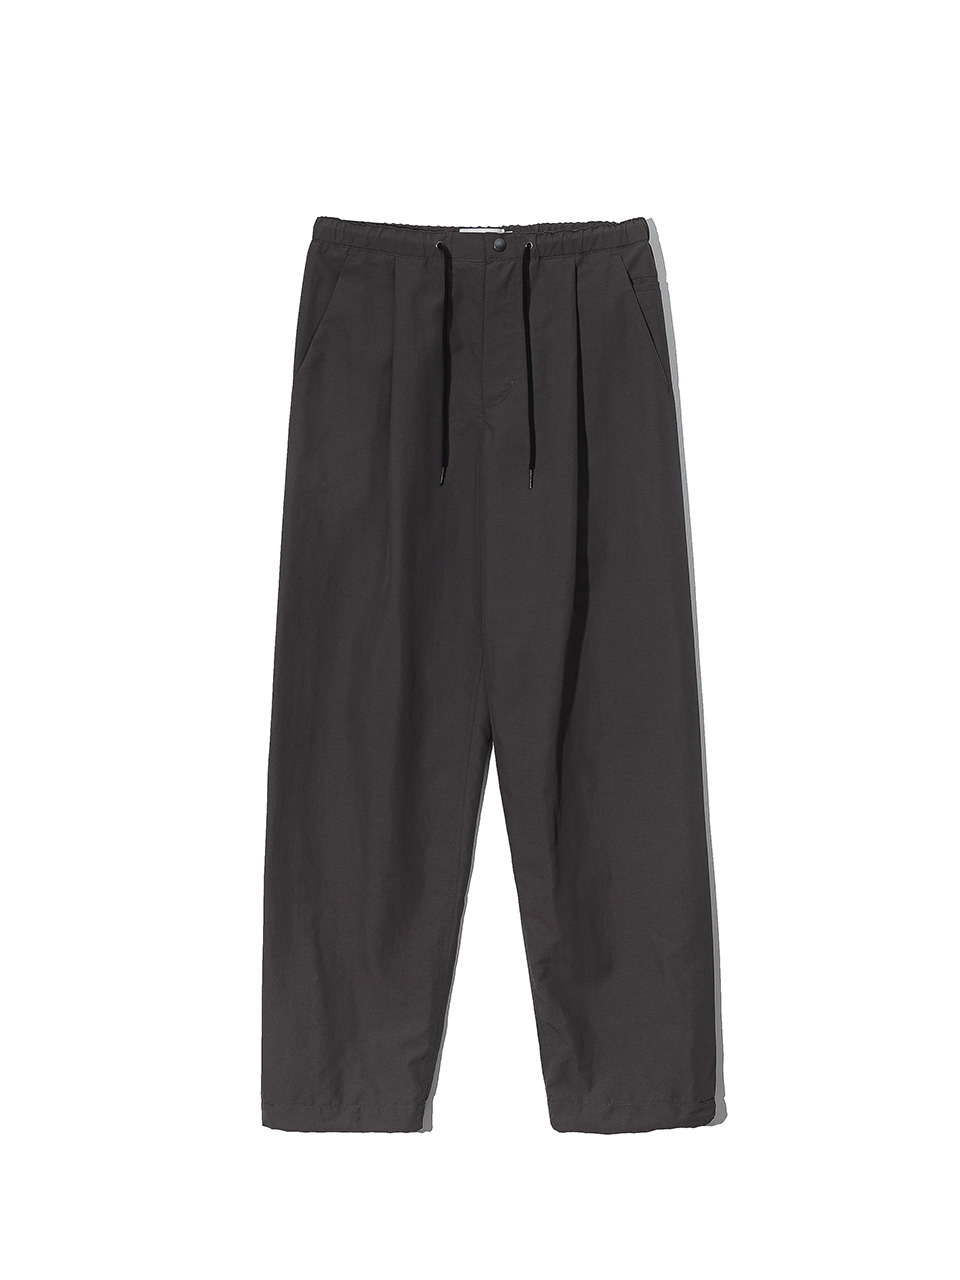 [Ourselves] SILKY NYLON MOUNTAIN PANTS (Brown charcoal)